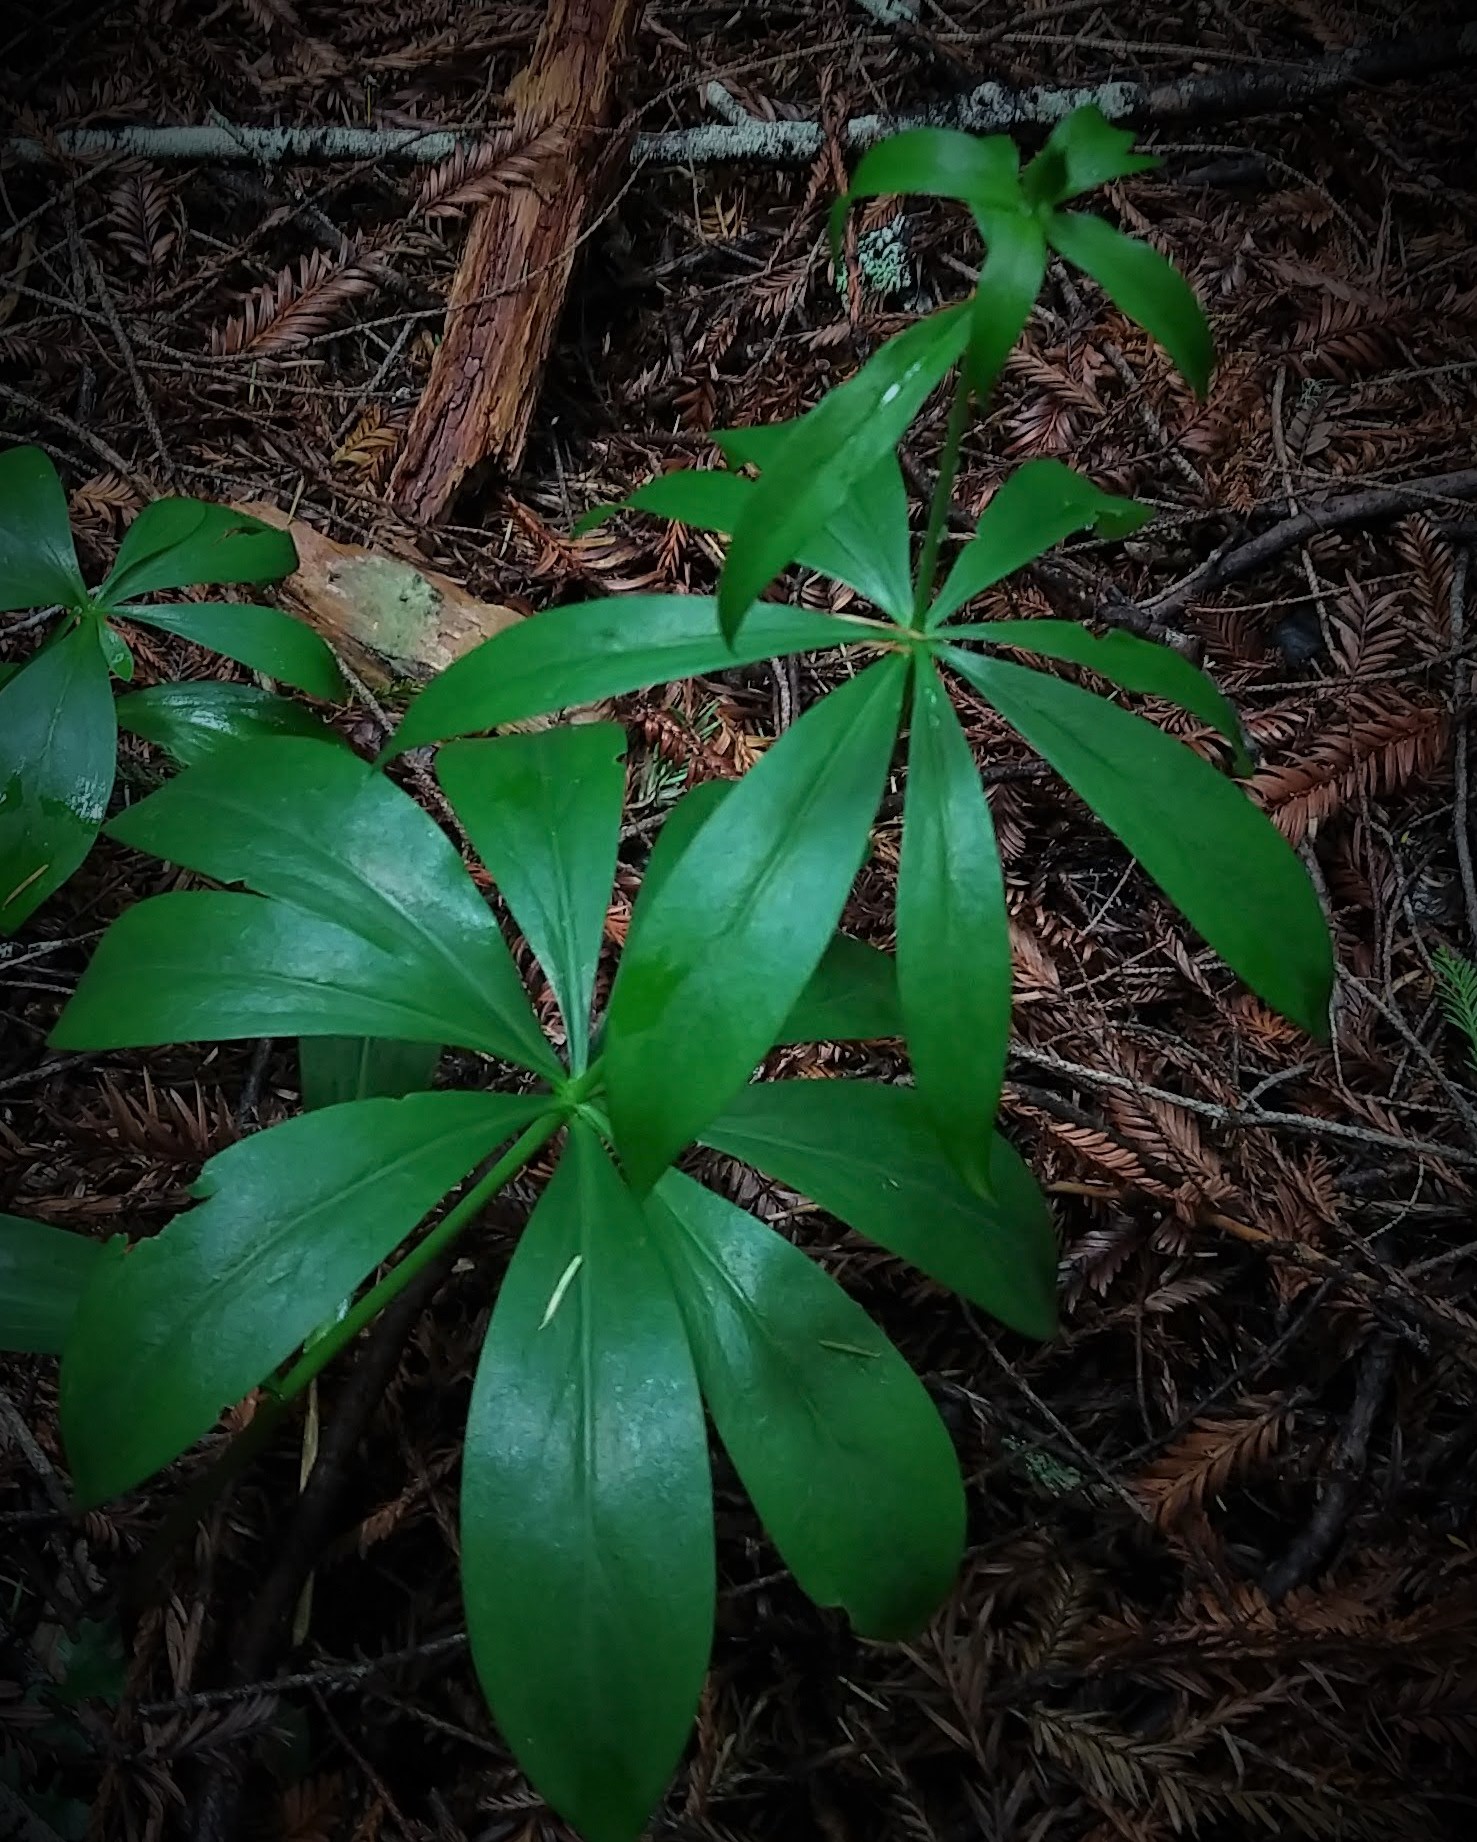 A plant with whorled leaves